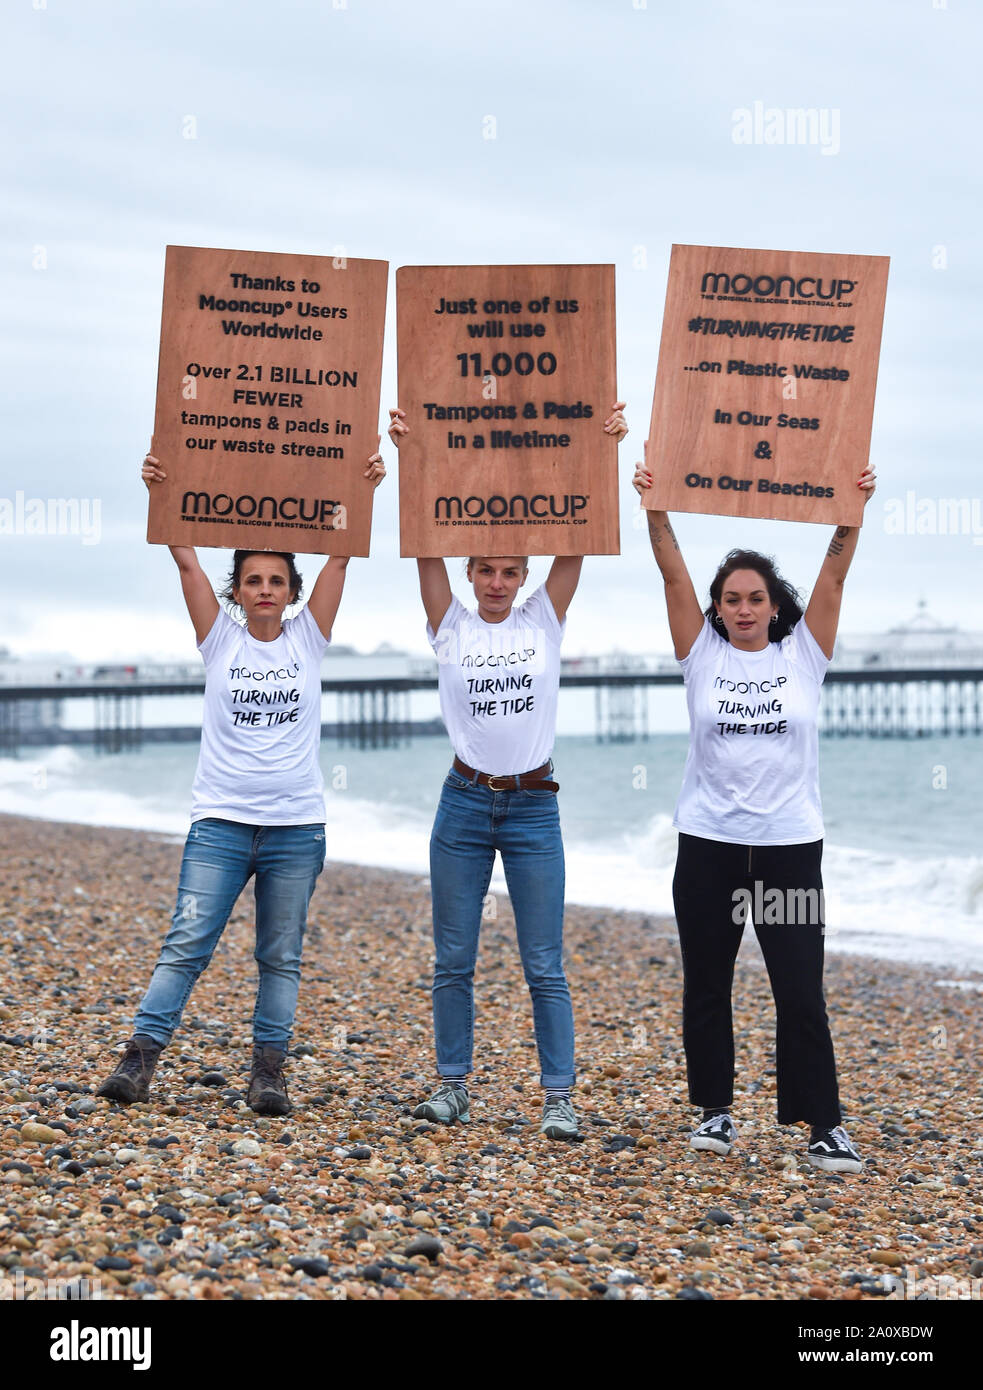 Brighton UK 22 September 2019 - From left Kath Clements , Jana Szczepaniak  and Rebecca Manning at the Mooncup "Turning the Tide" beach clean in  Brighton today as part of the Marine